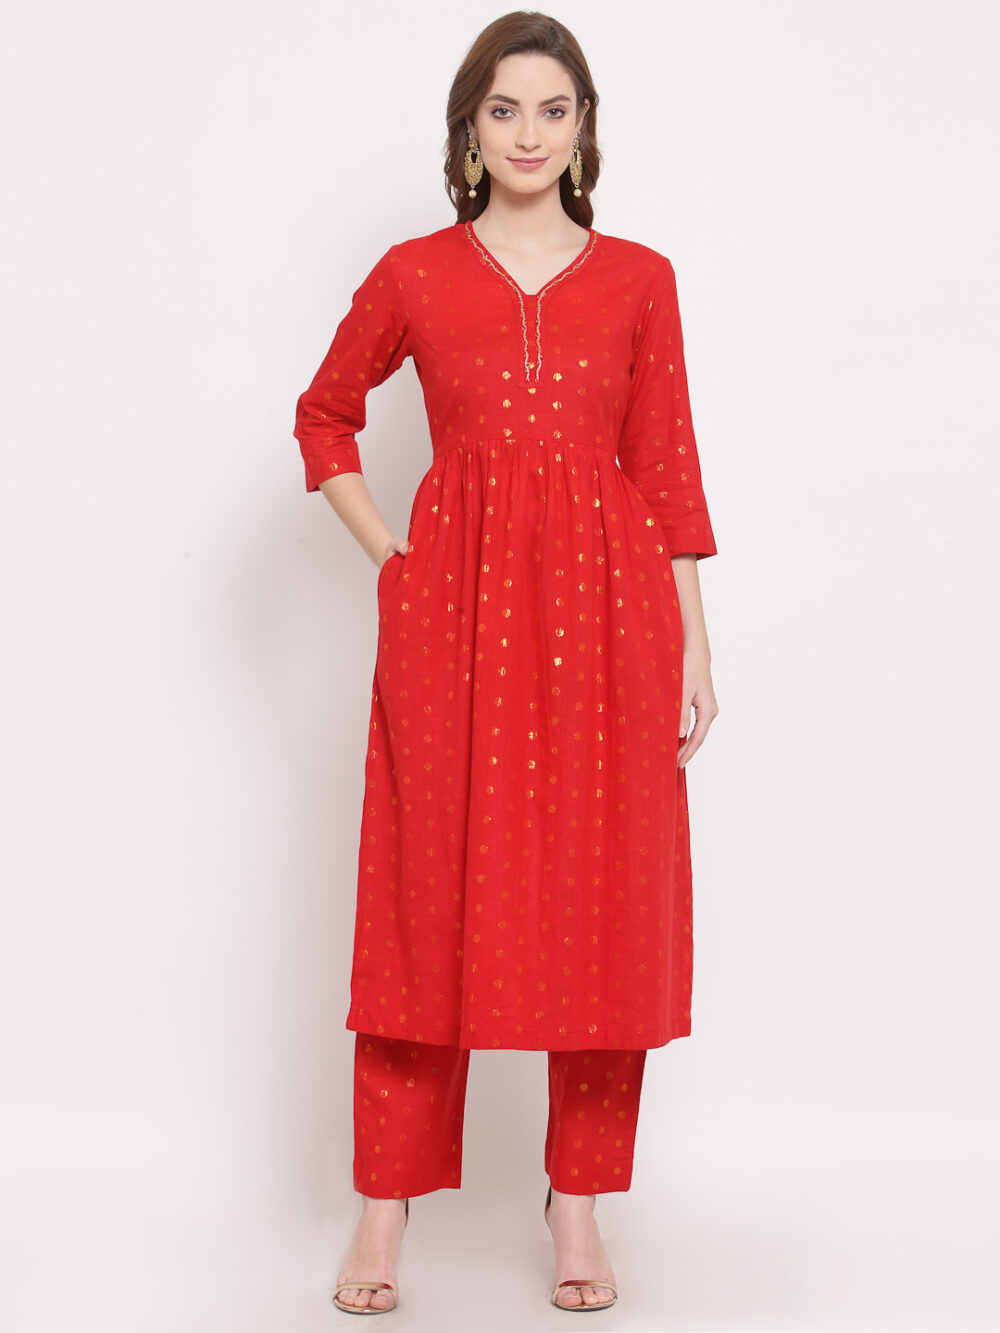 Hand Embroidered Red Cotton Kurta with Pants